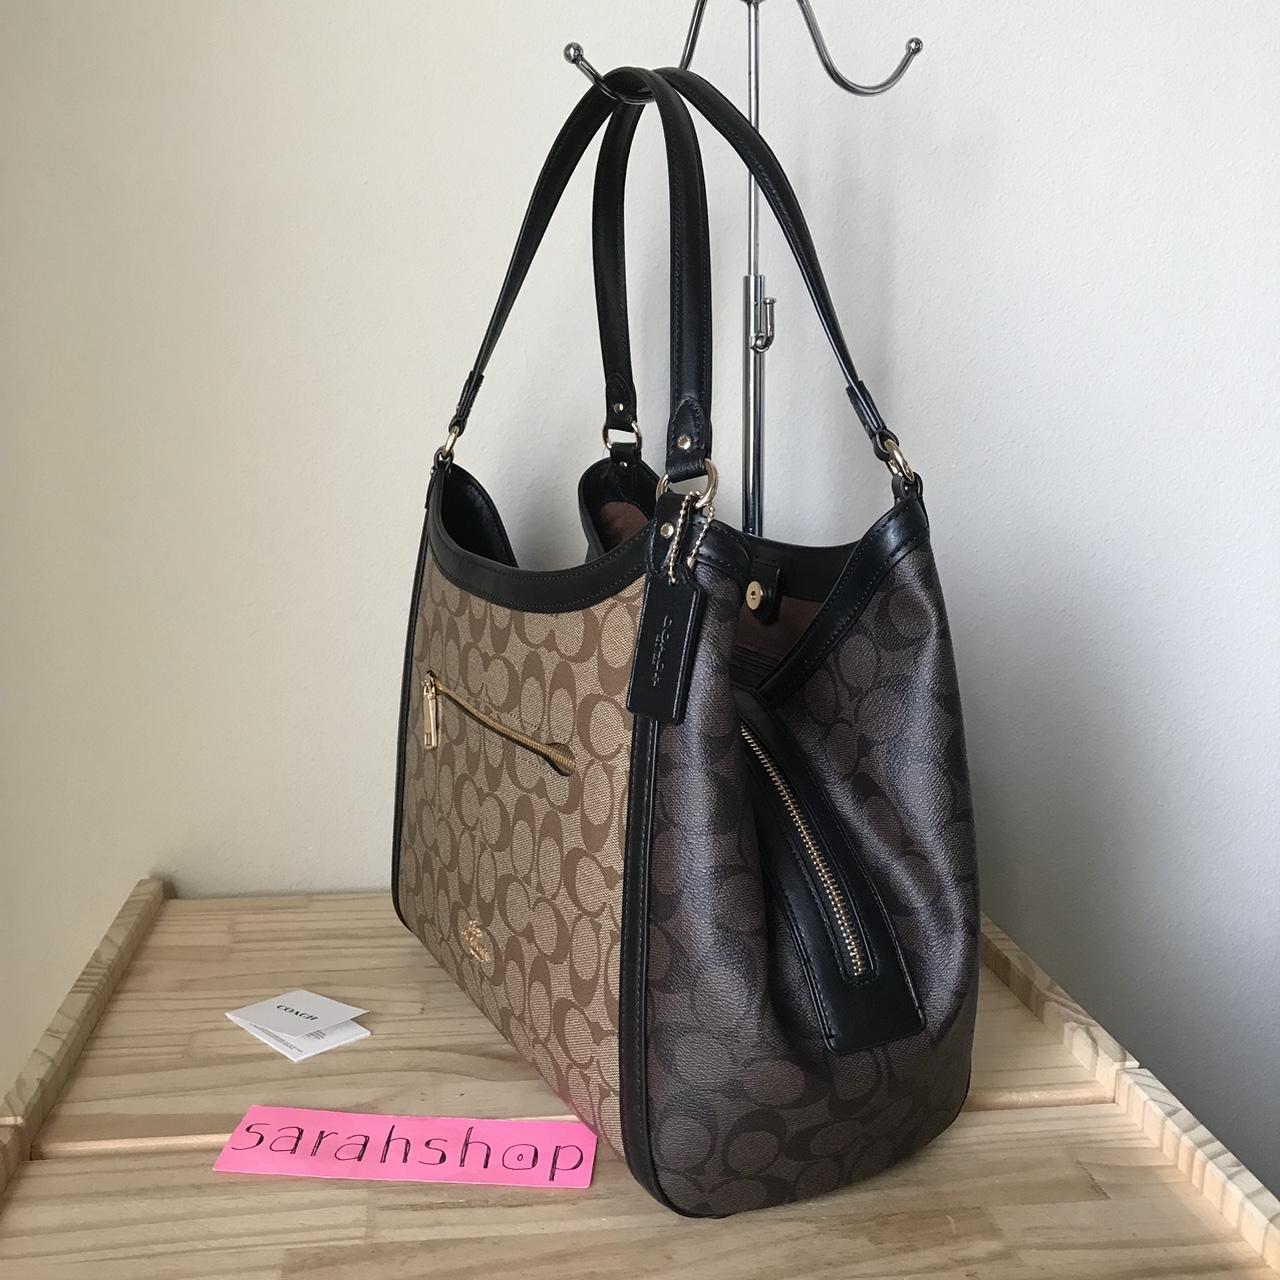 Buy the Coach Marlon Leather Hobo Signature Canvas Brown/Pink